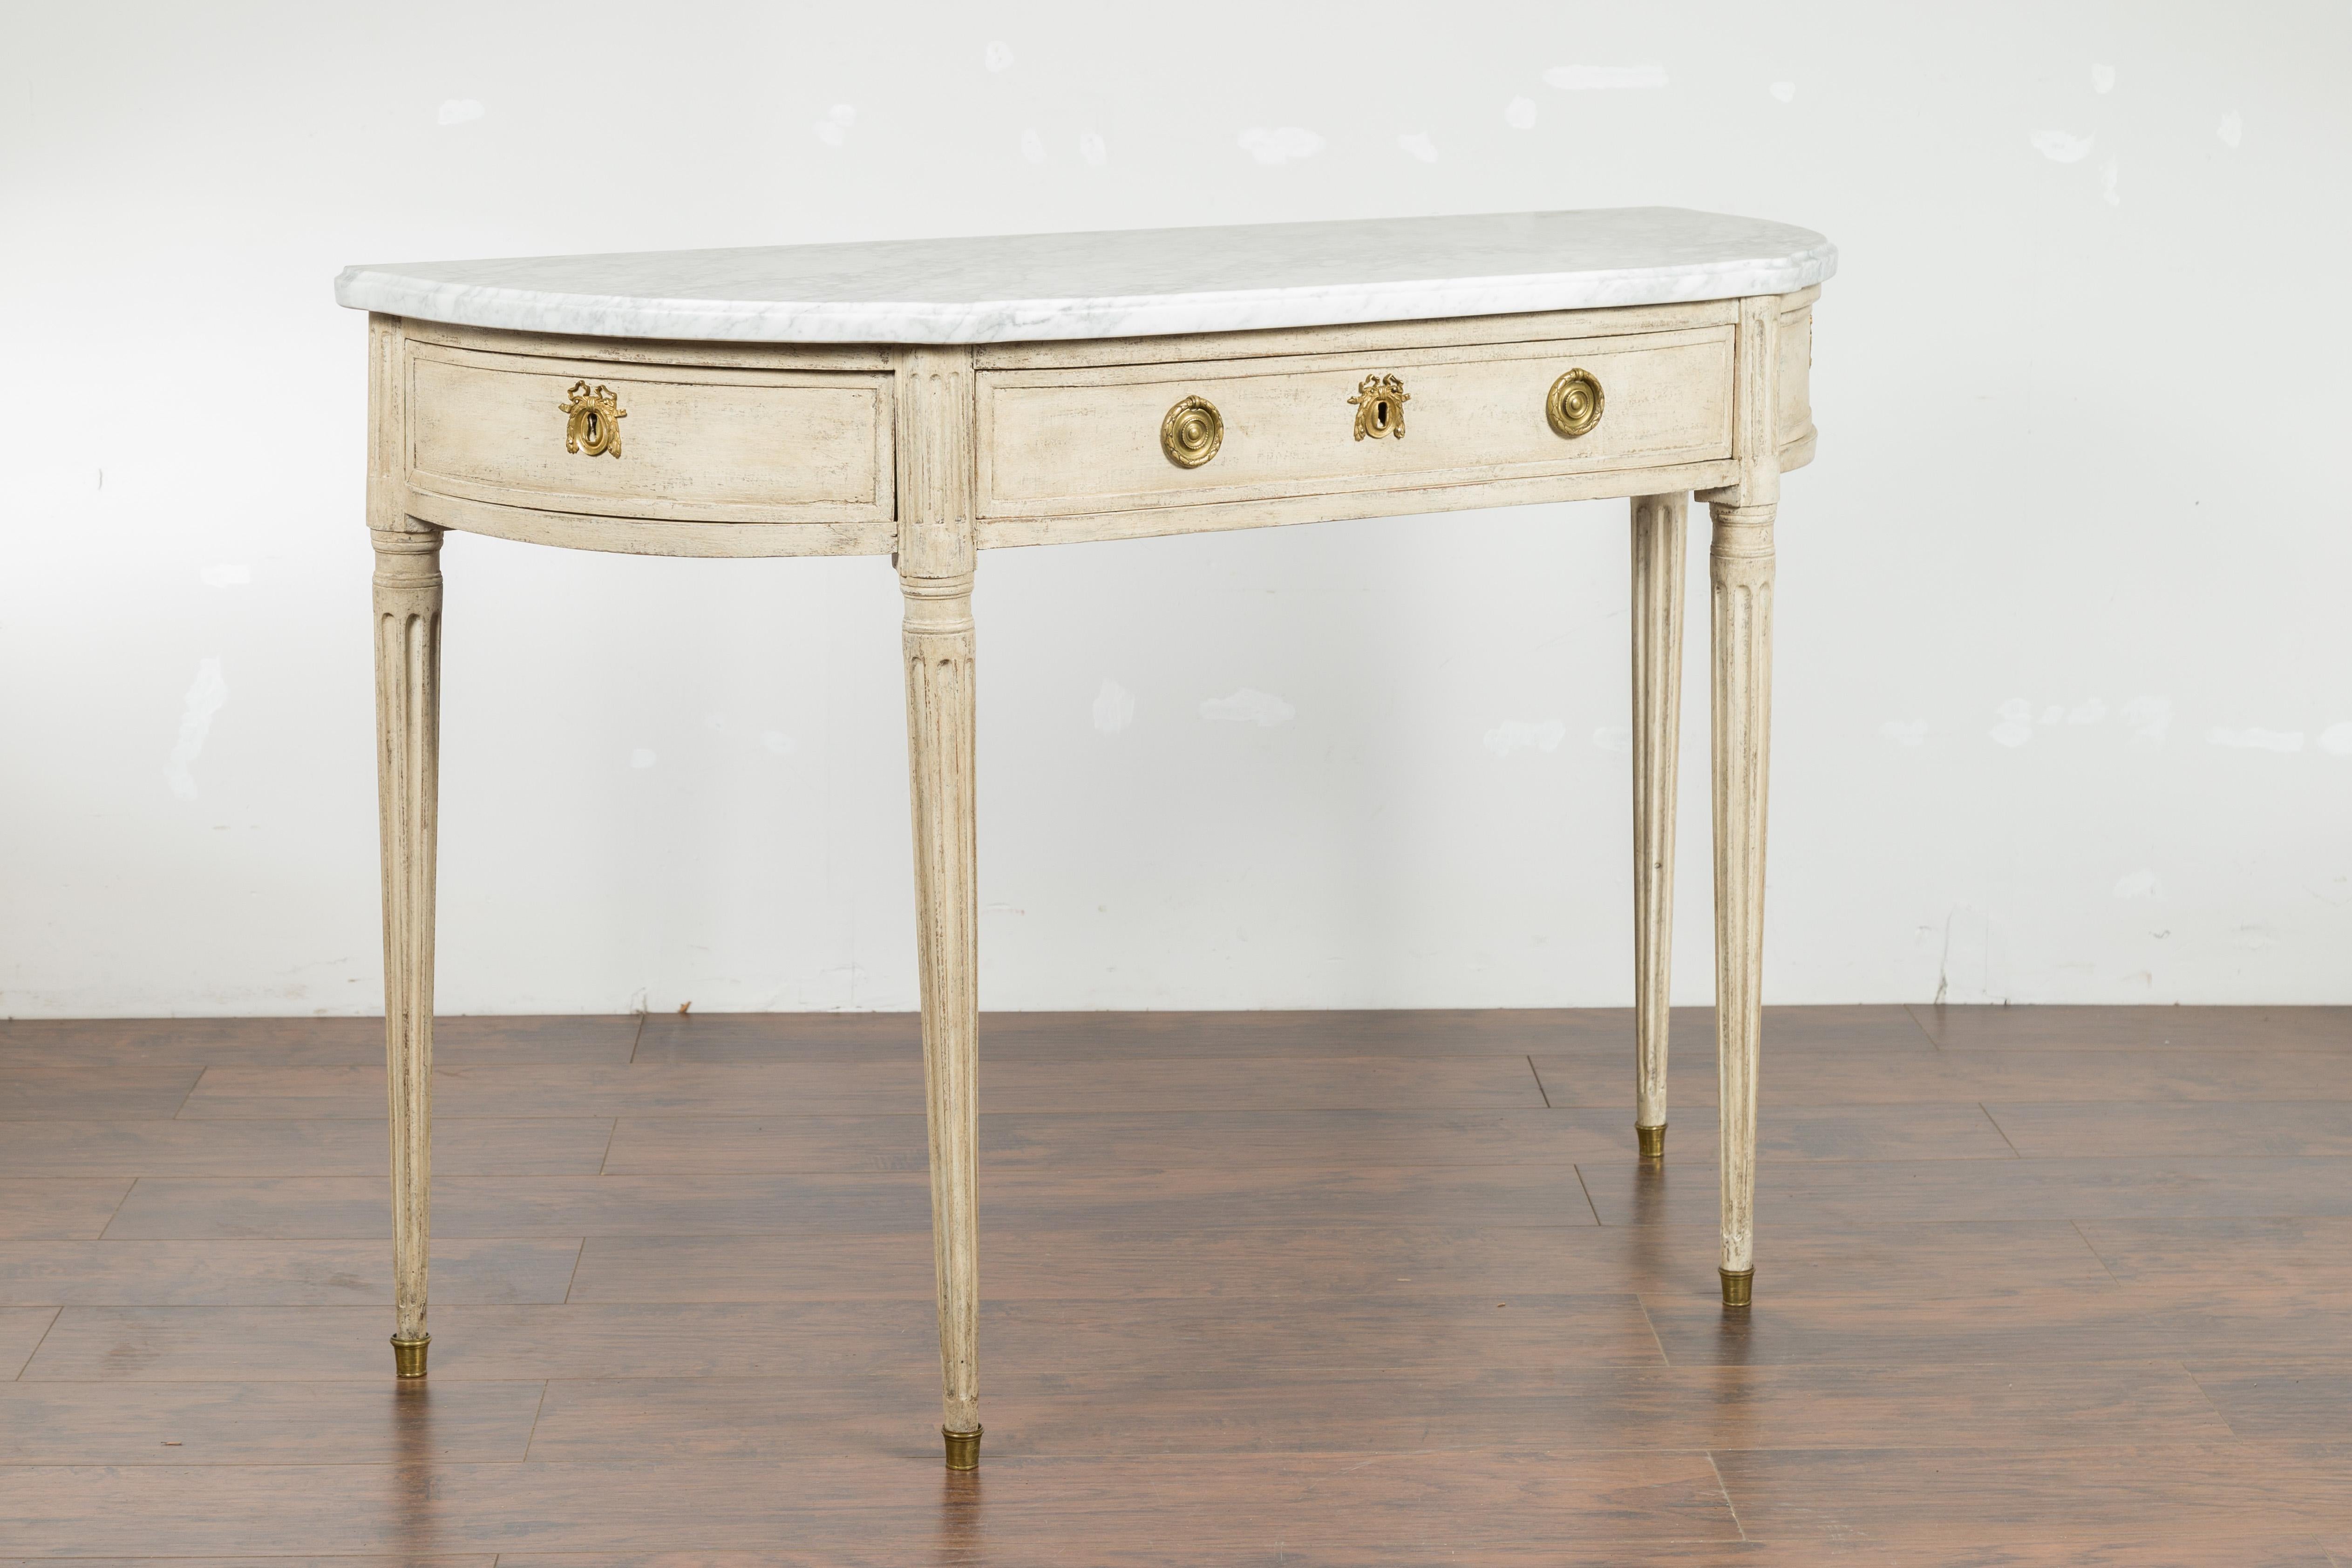 Pair of French 19th Century Neoclassical Style Demilune Tables with Marble Tops For Sale 8